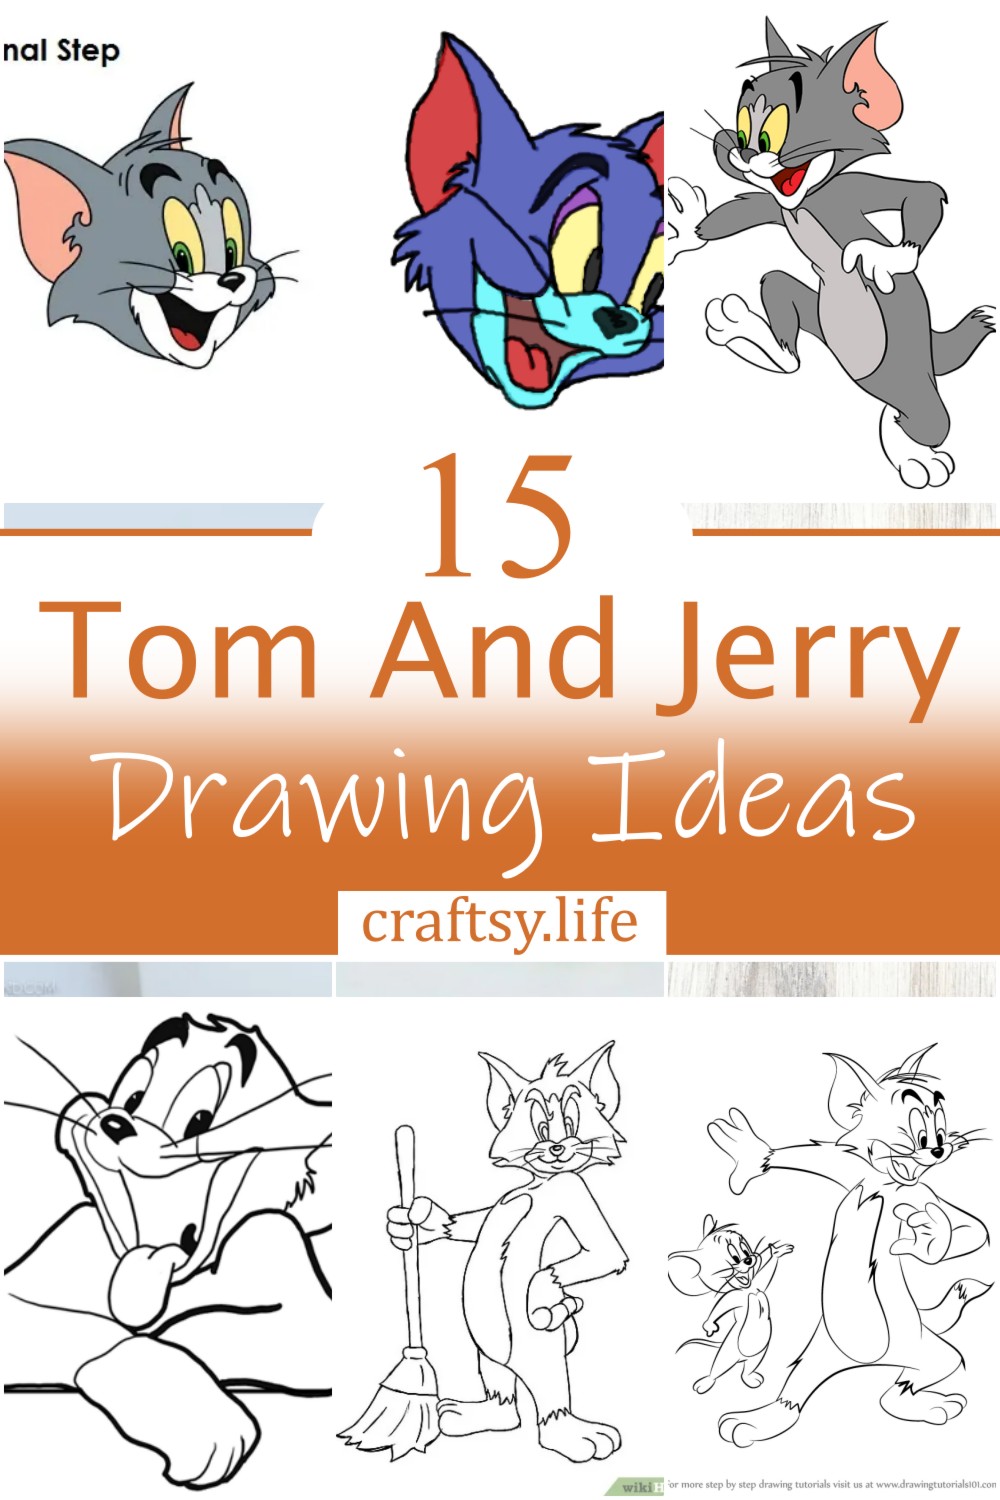 15 Tom And Jerry Drawing Ideas